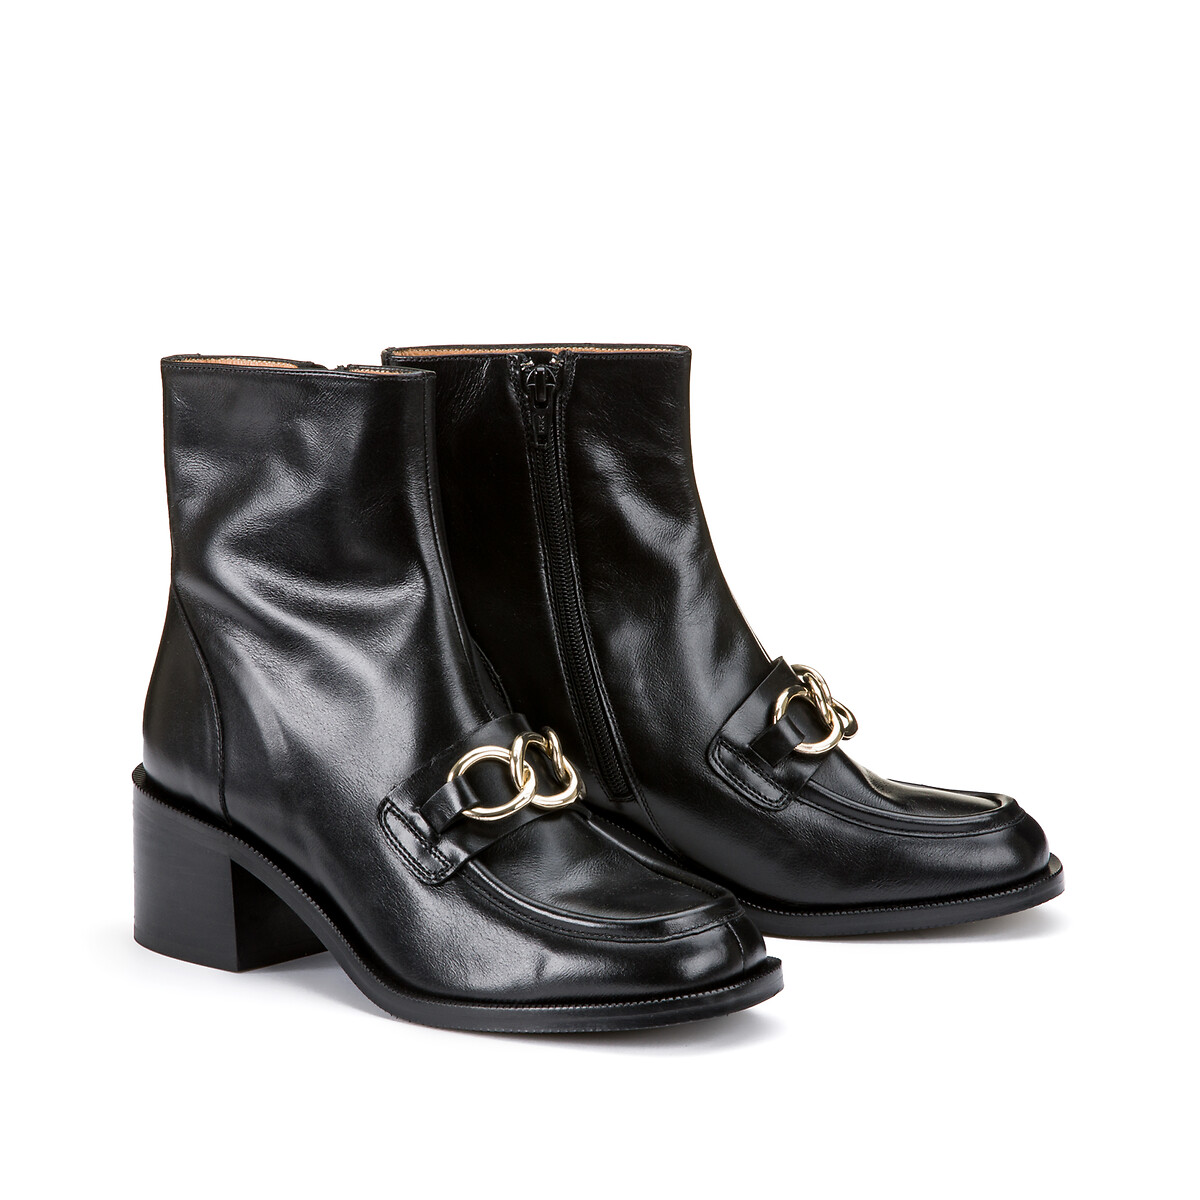 Courreges Low Heels Ankle Boots In Black Leather | Lyst